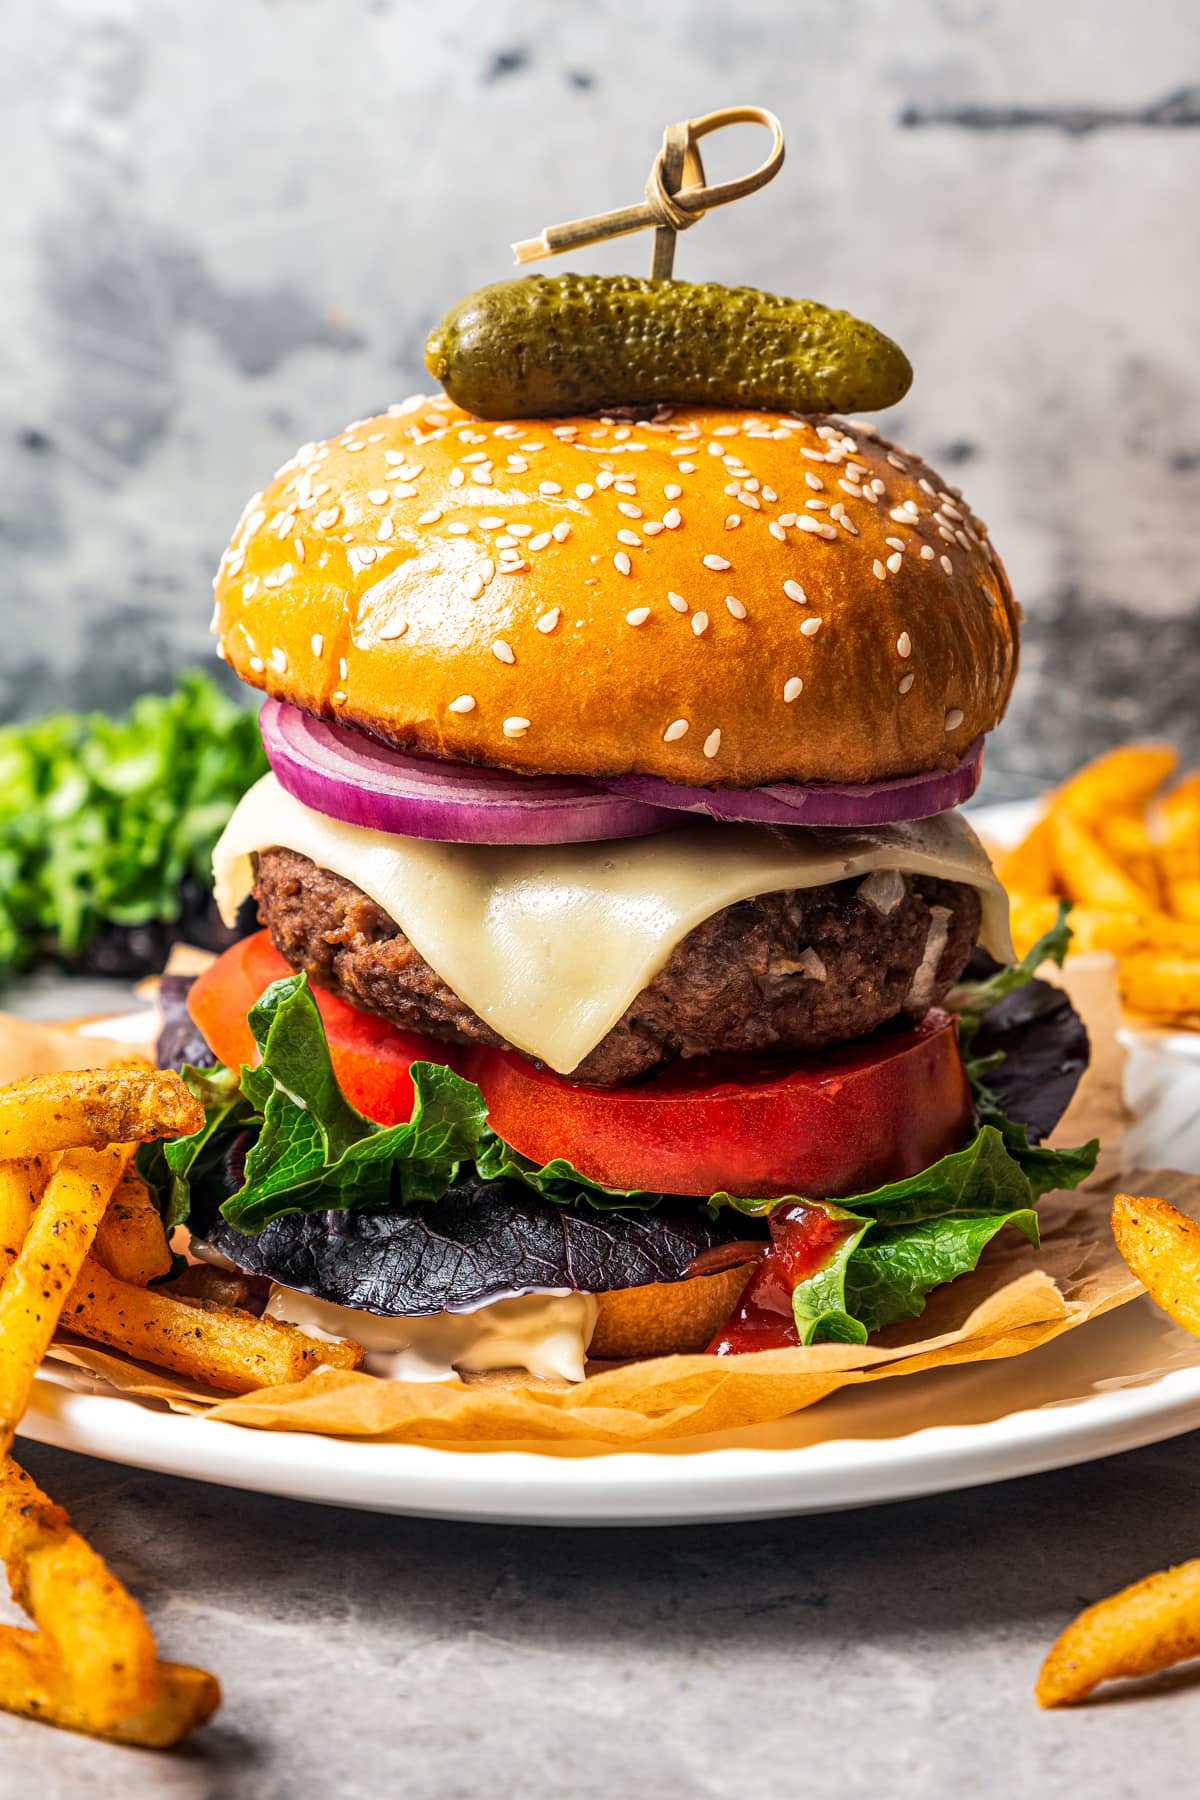 A classic American cheeseburger on a plate with french fries.